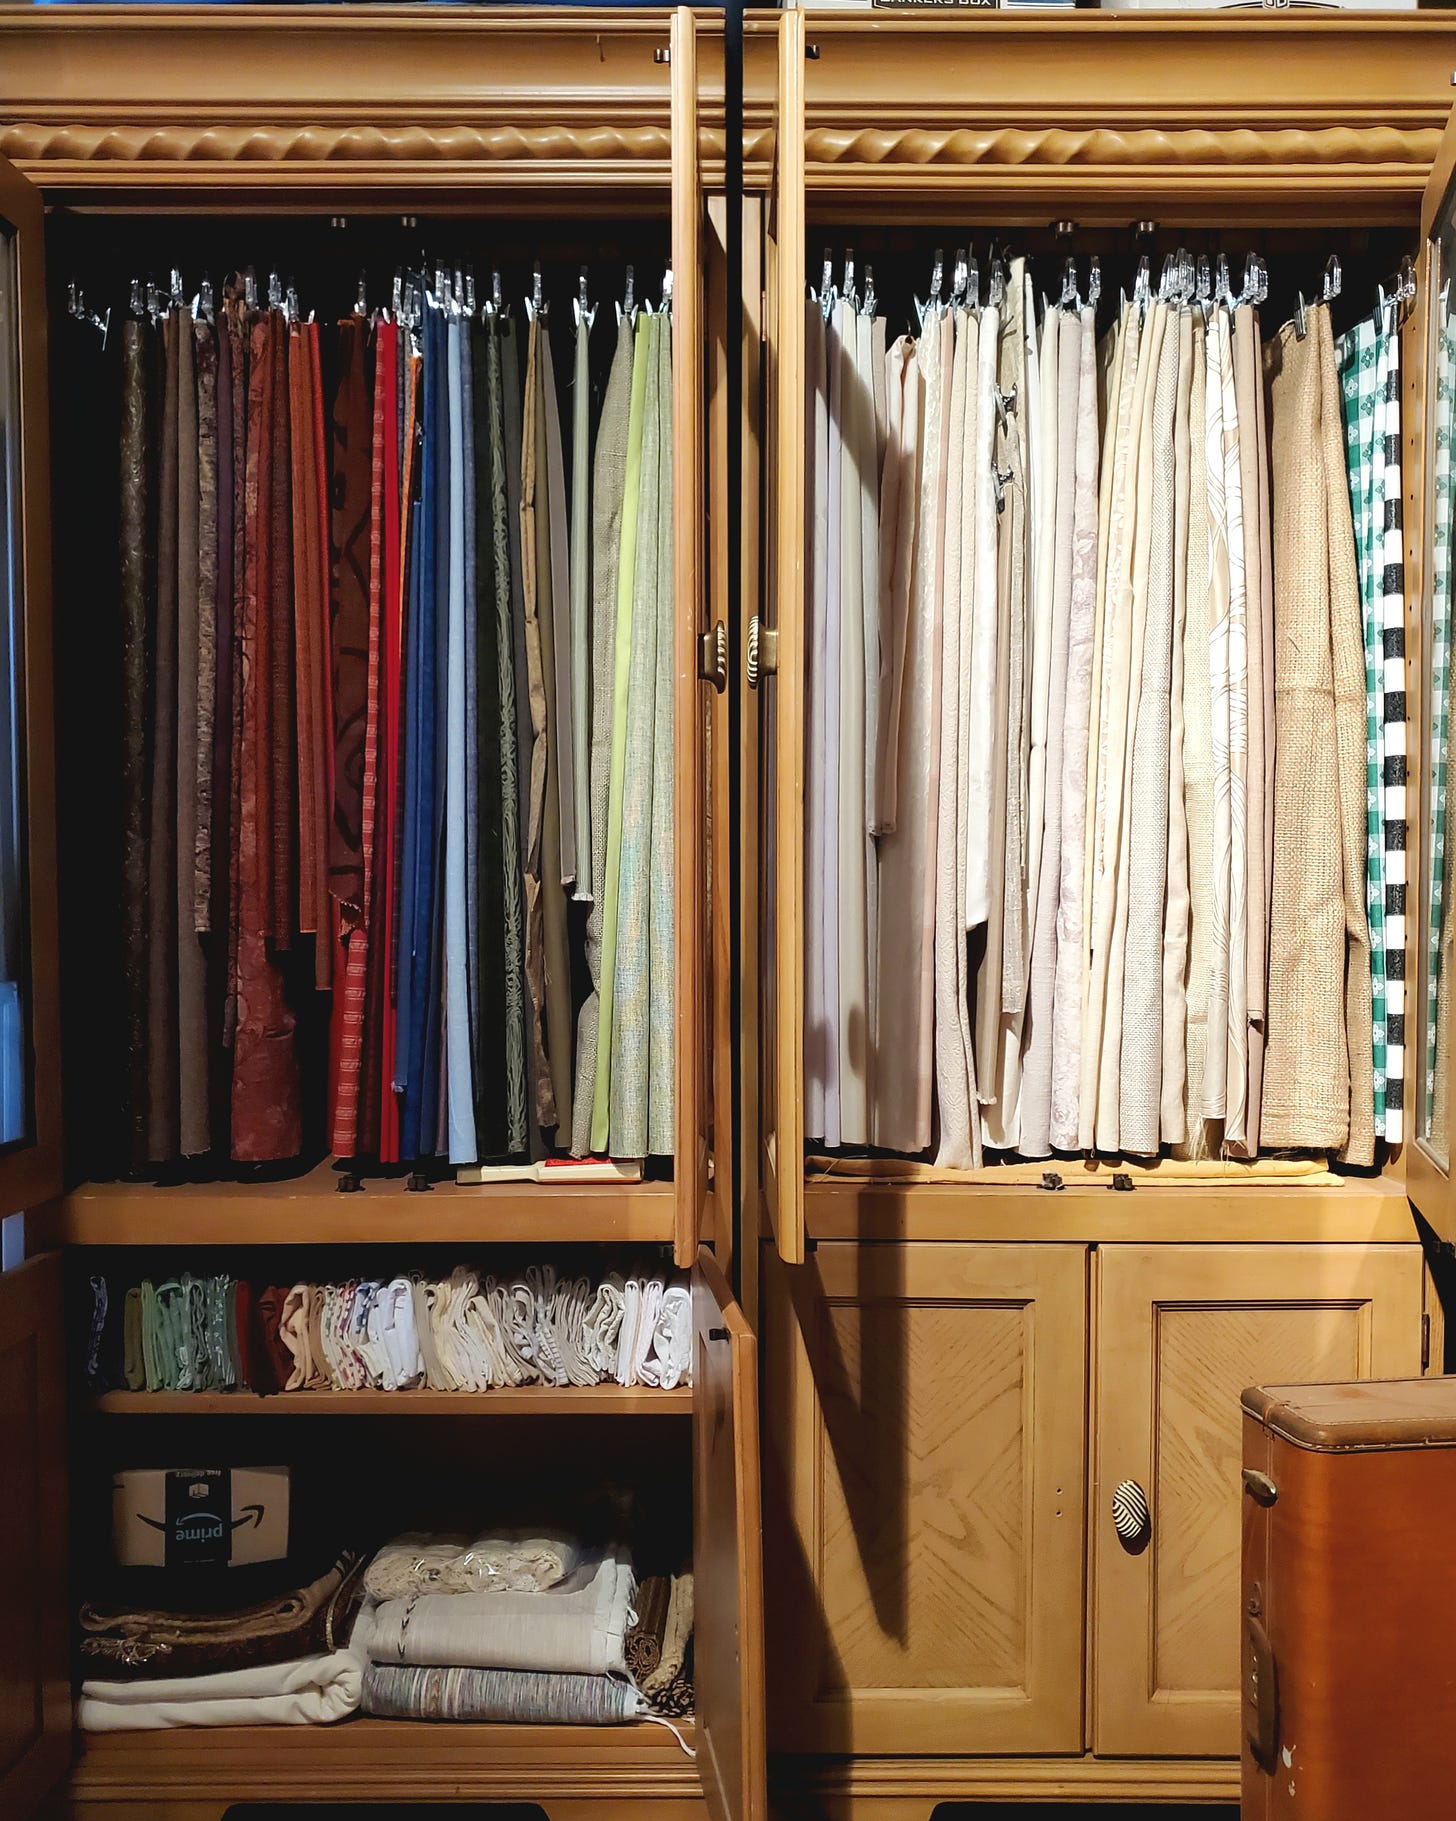 A cabinet full of hanging fabric